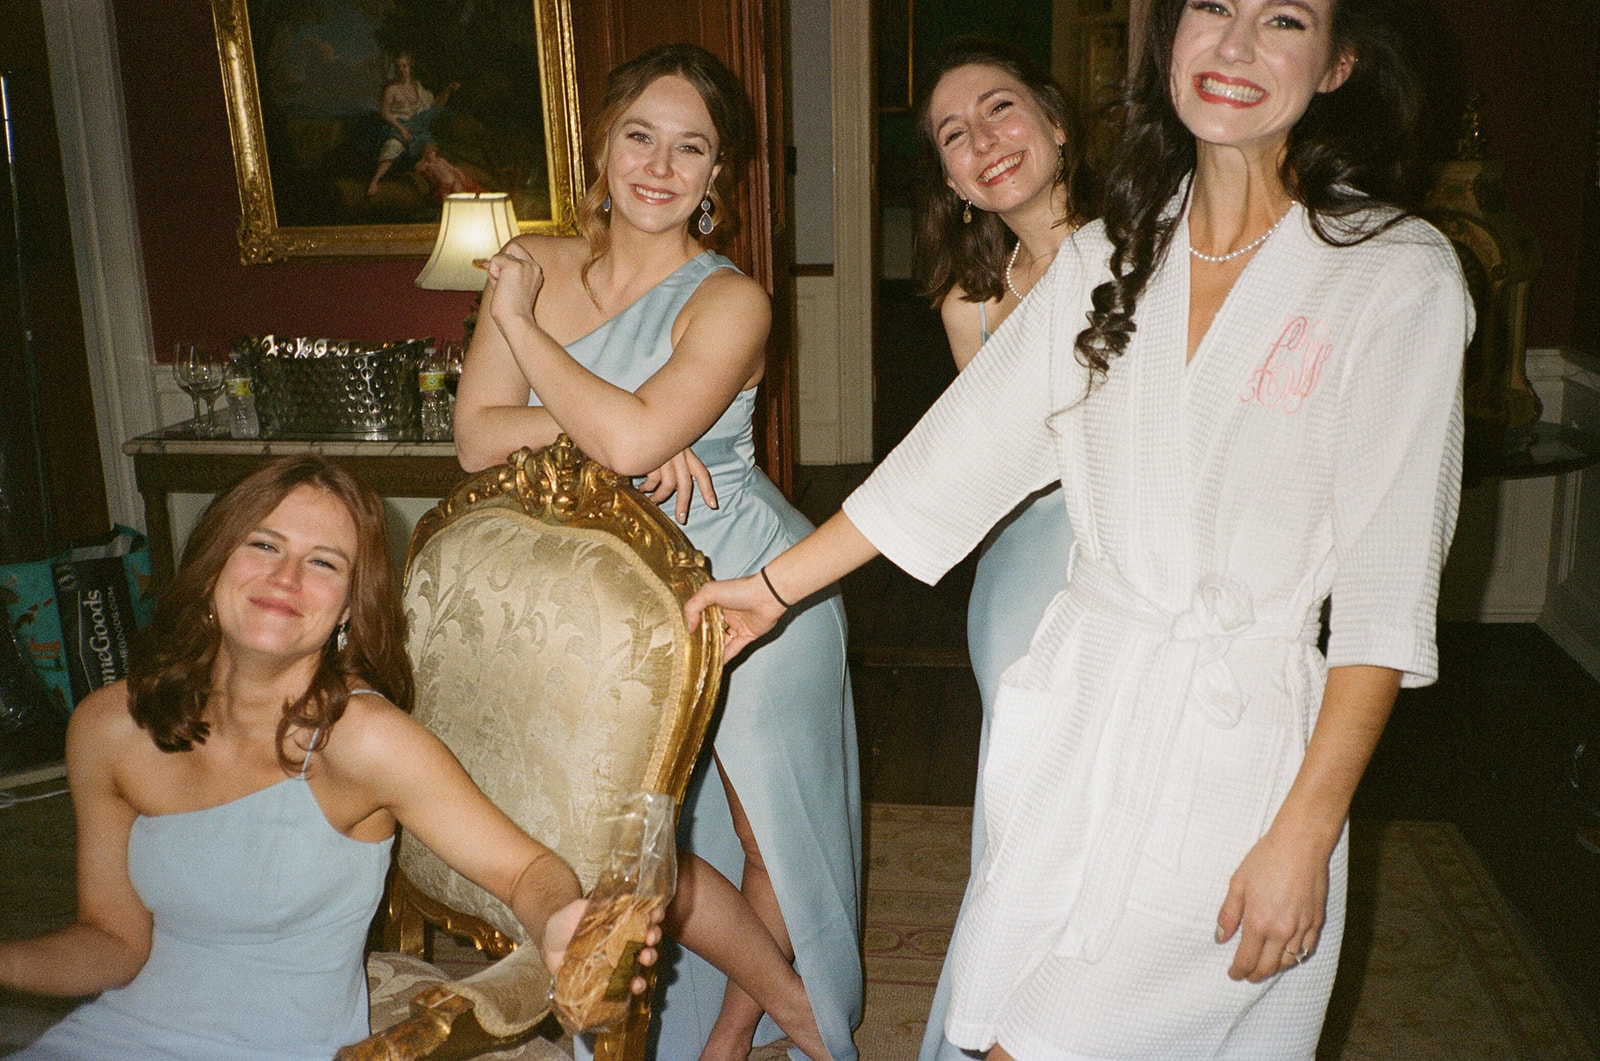 Film photos of the bride and her bridesmaids